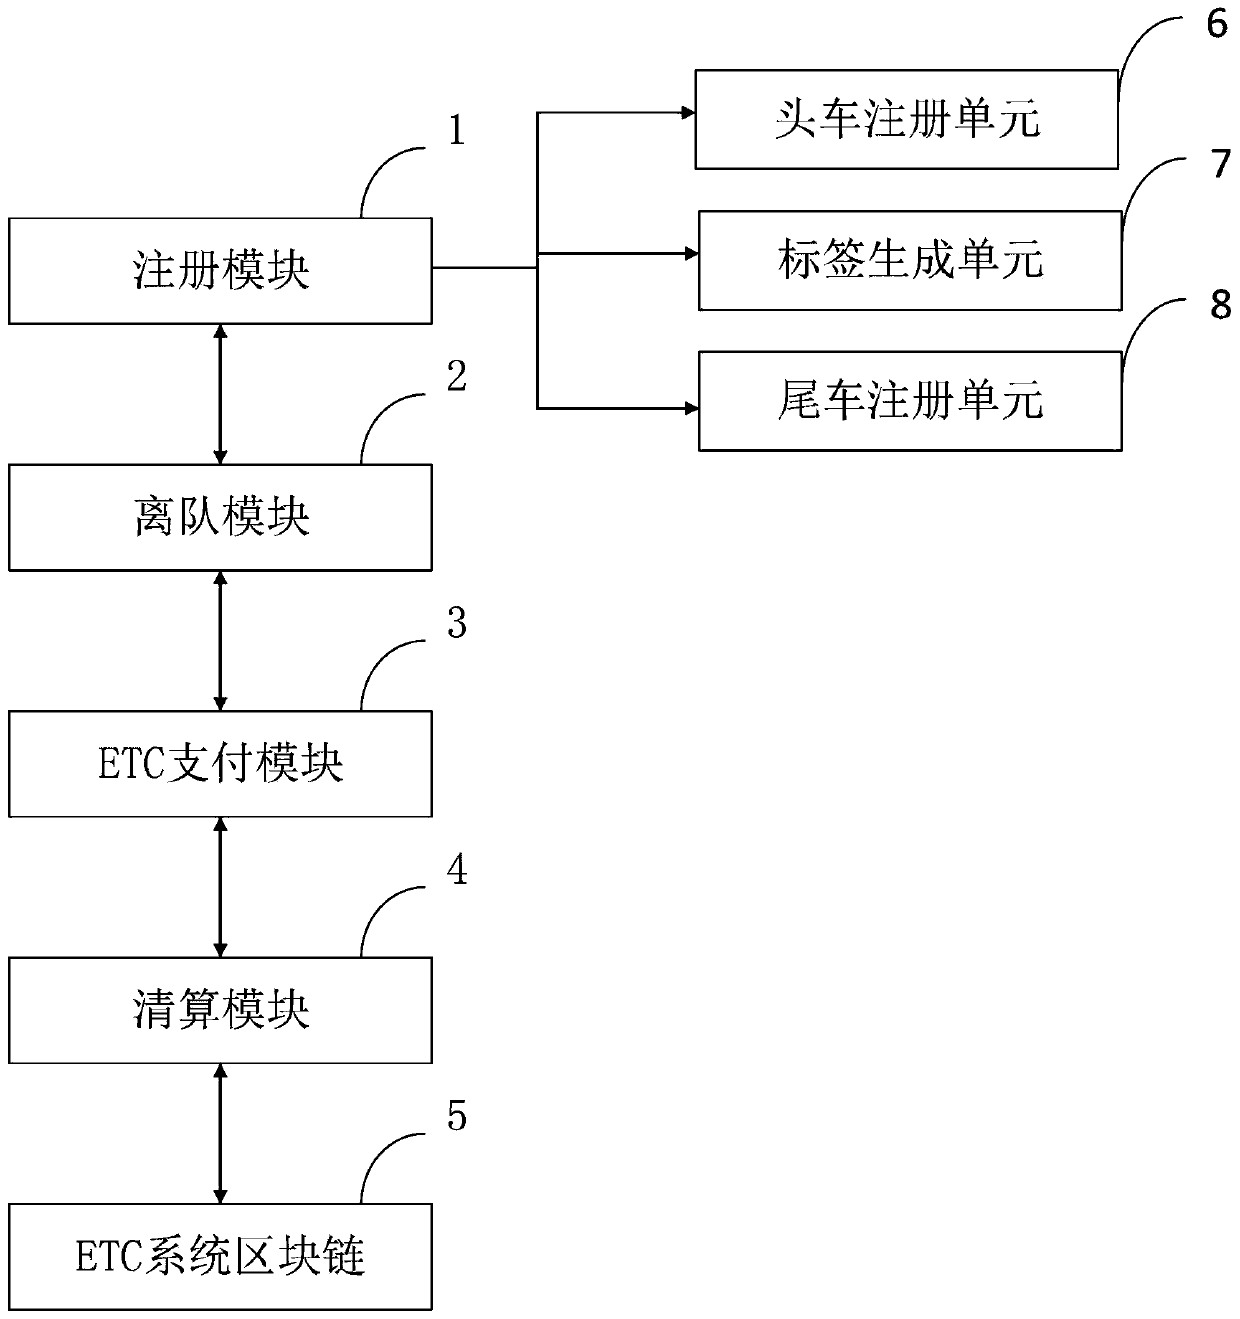 Motorcade ETC payment information processing system and method based on blockchain